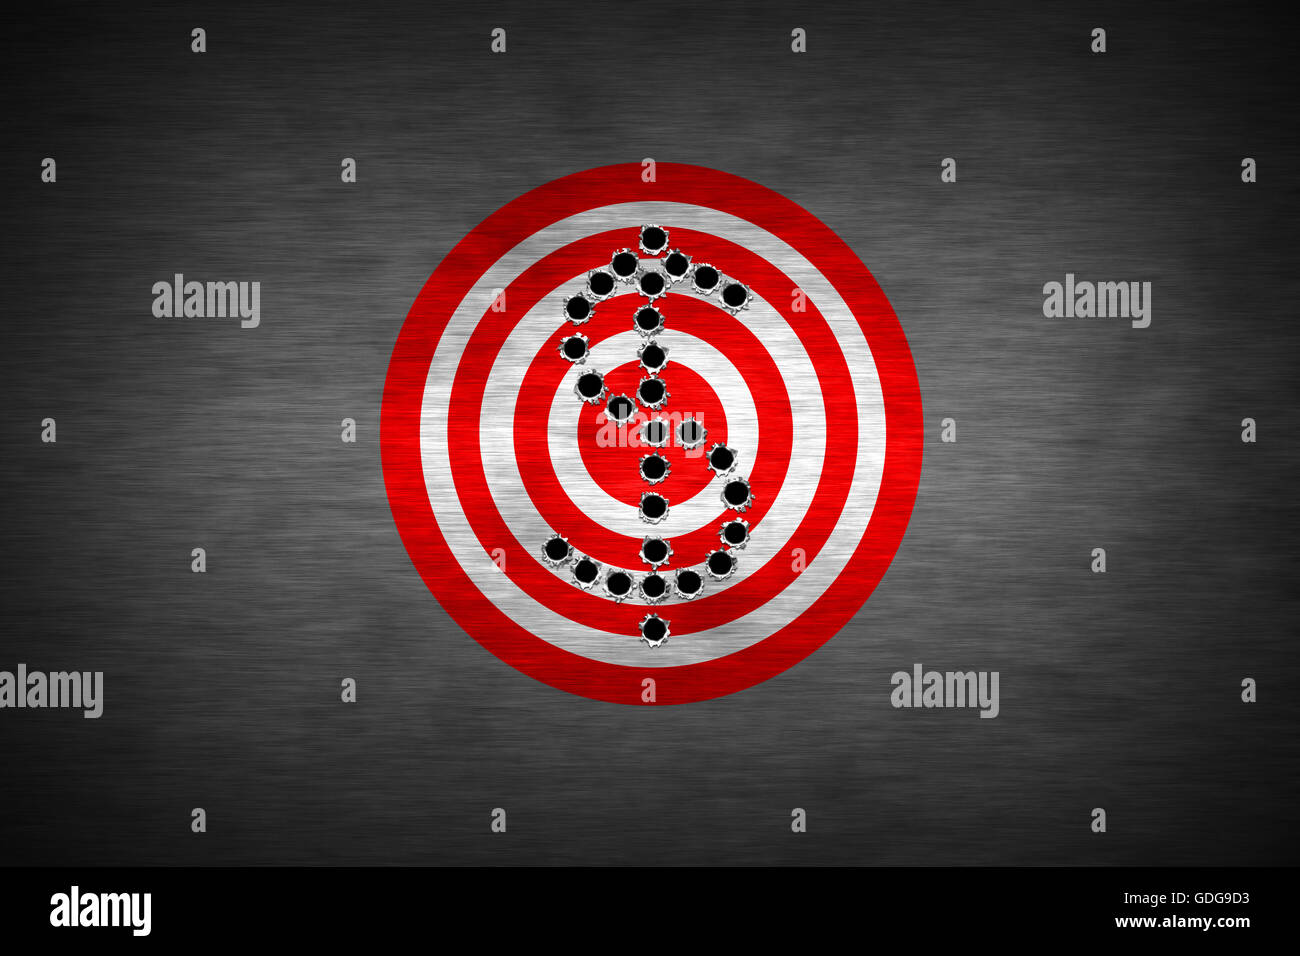 bullet hole on target. metal background. concept design for business theme design. Stock Photo